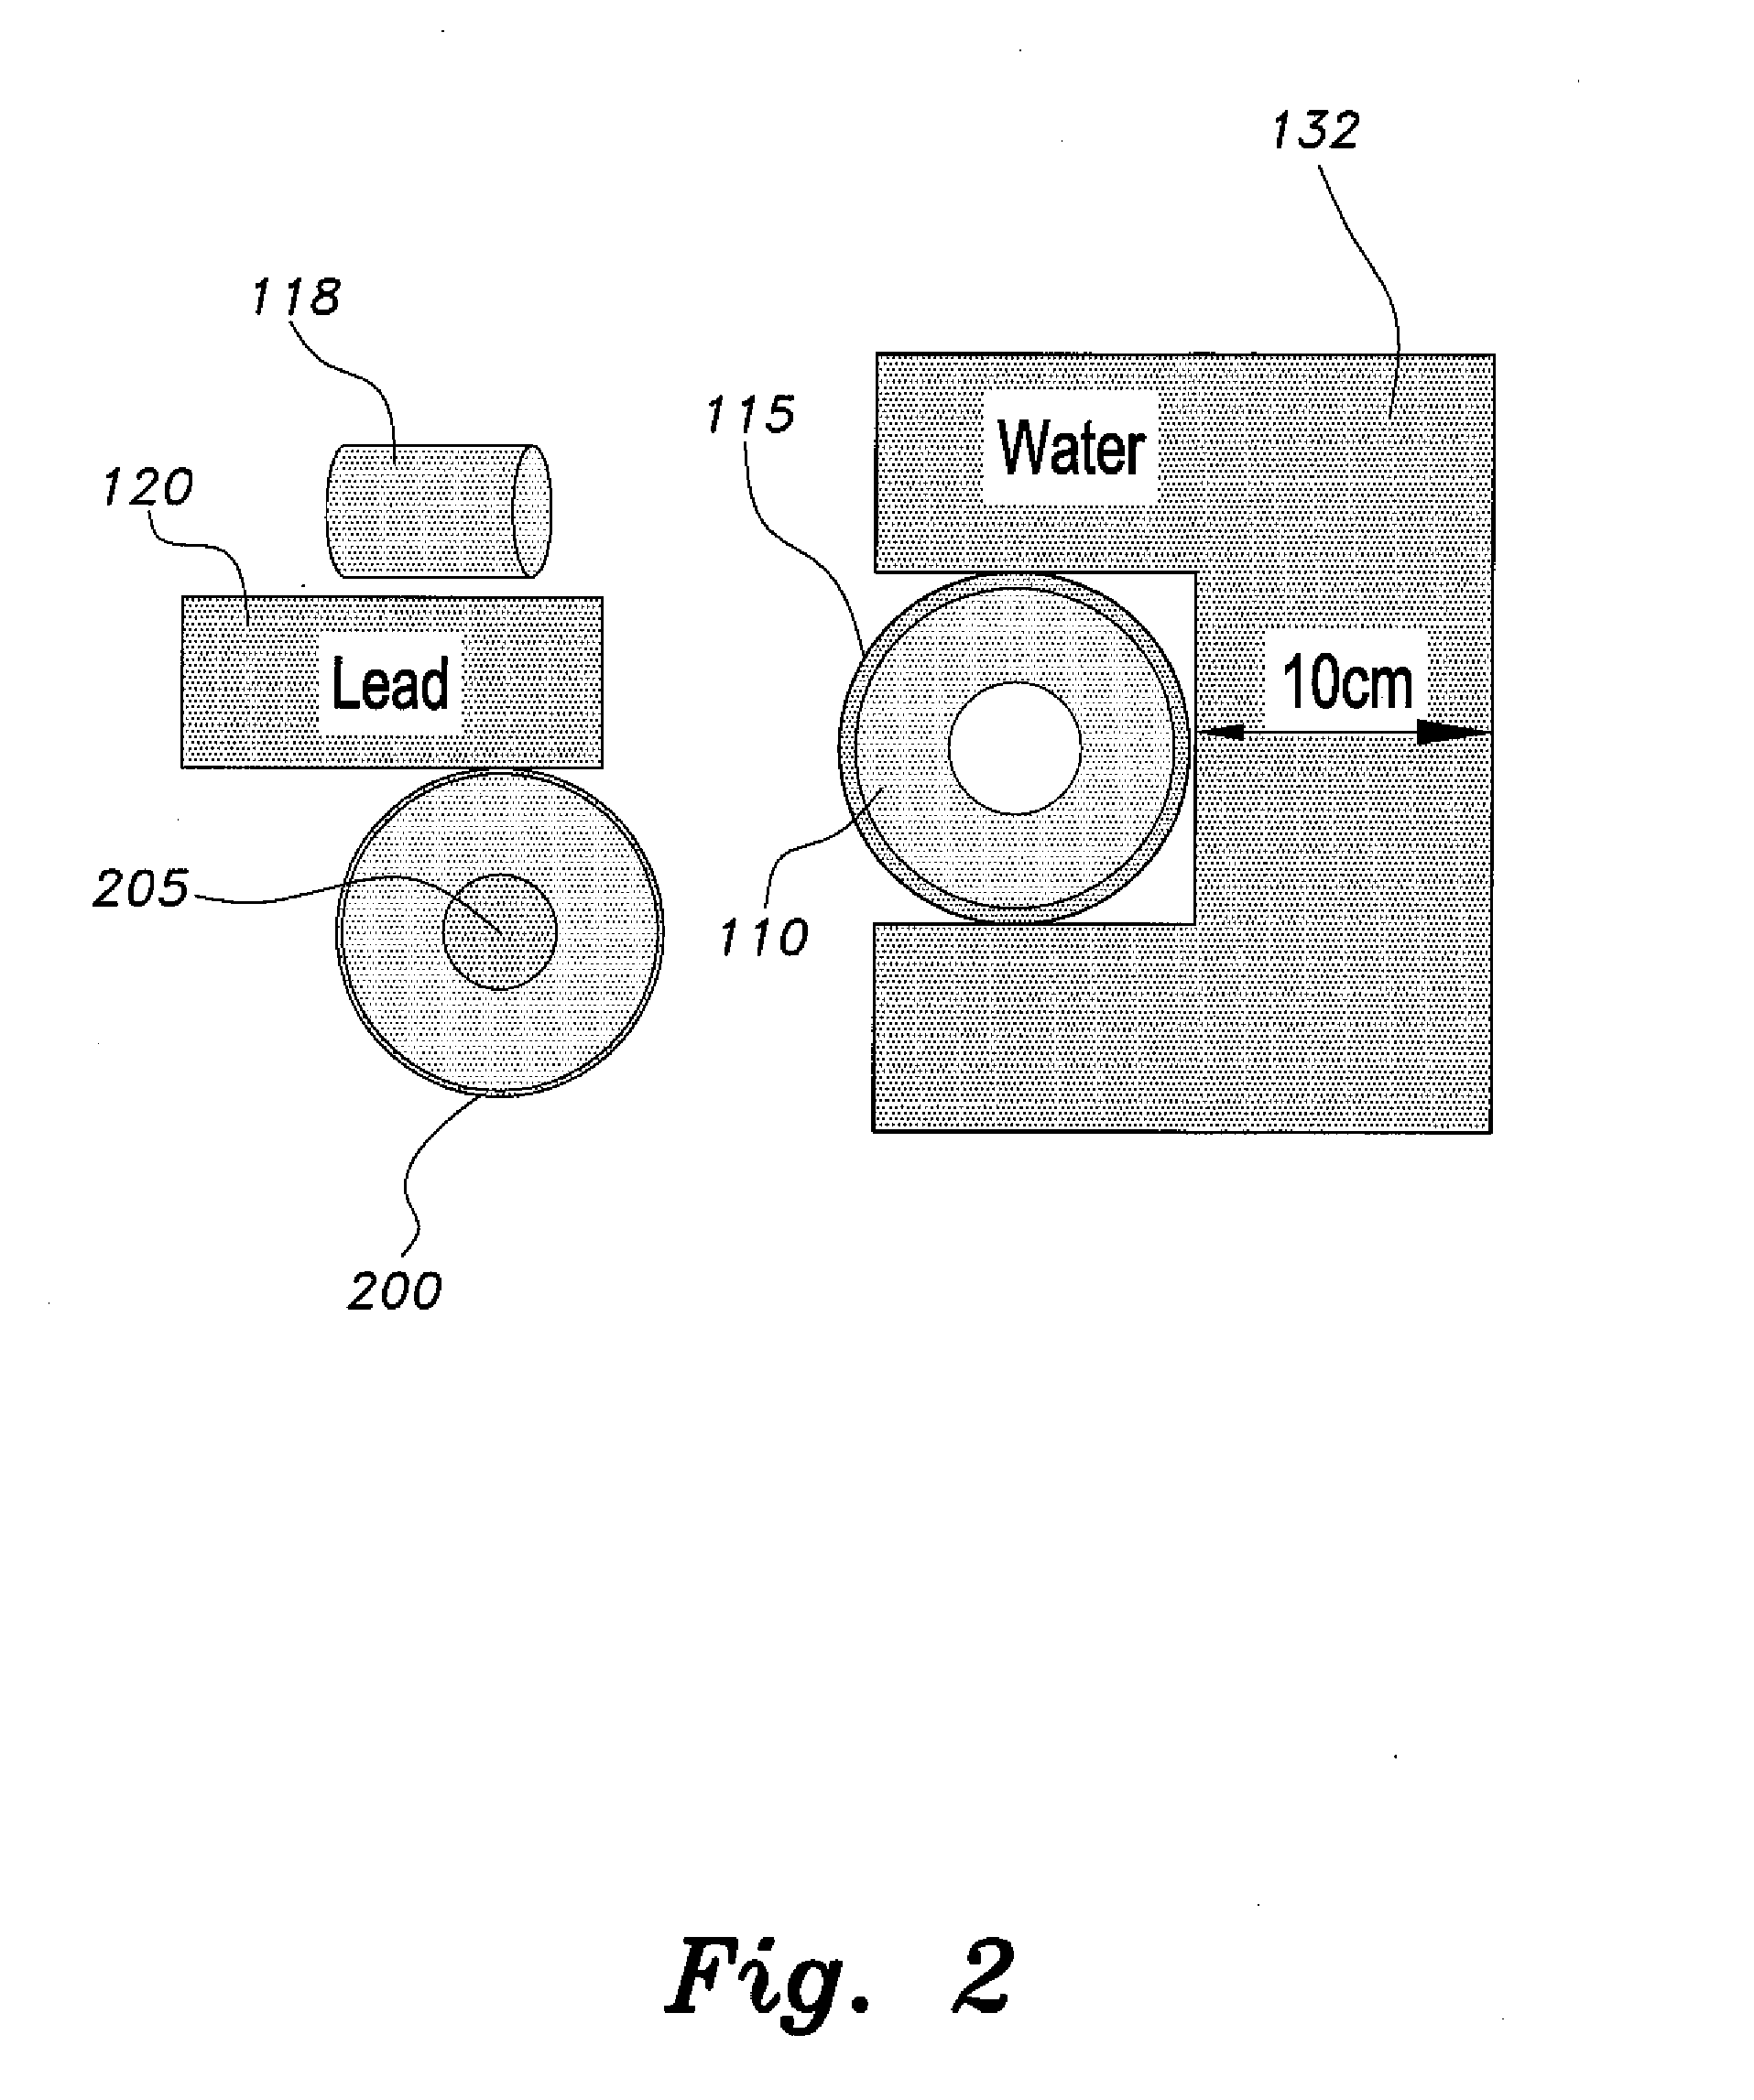 Systems for determining and imaging wax deposition and simultaneous corrosion and wax deposit determination in pipelines